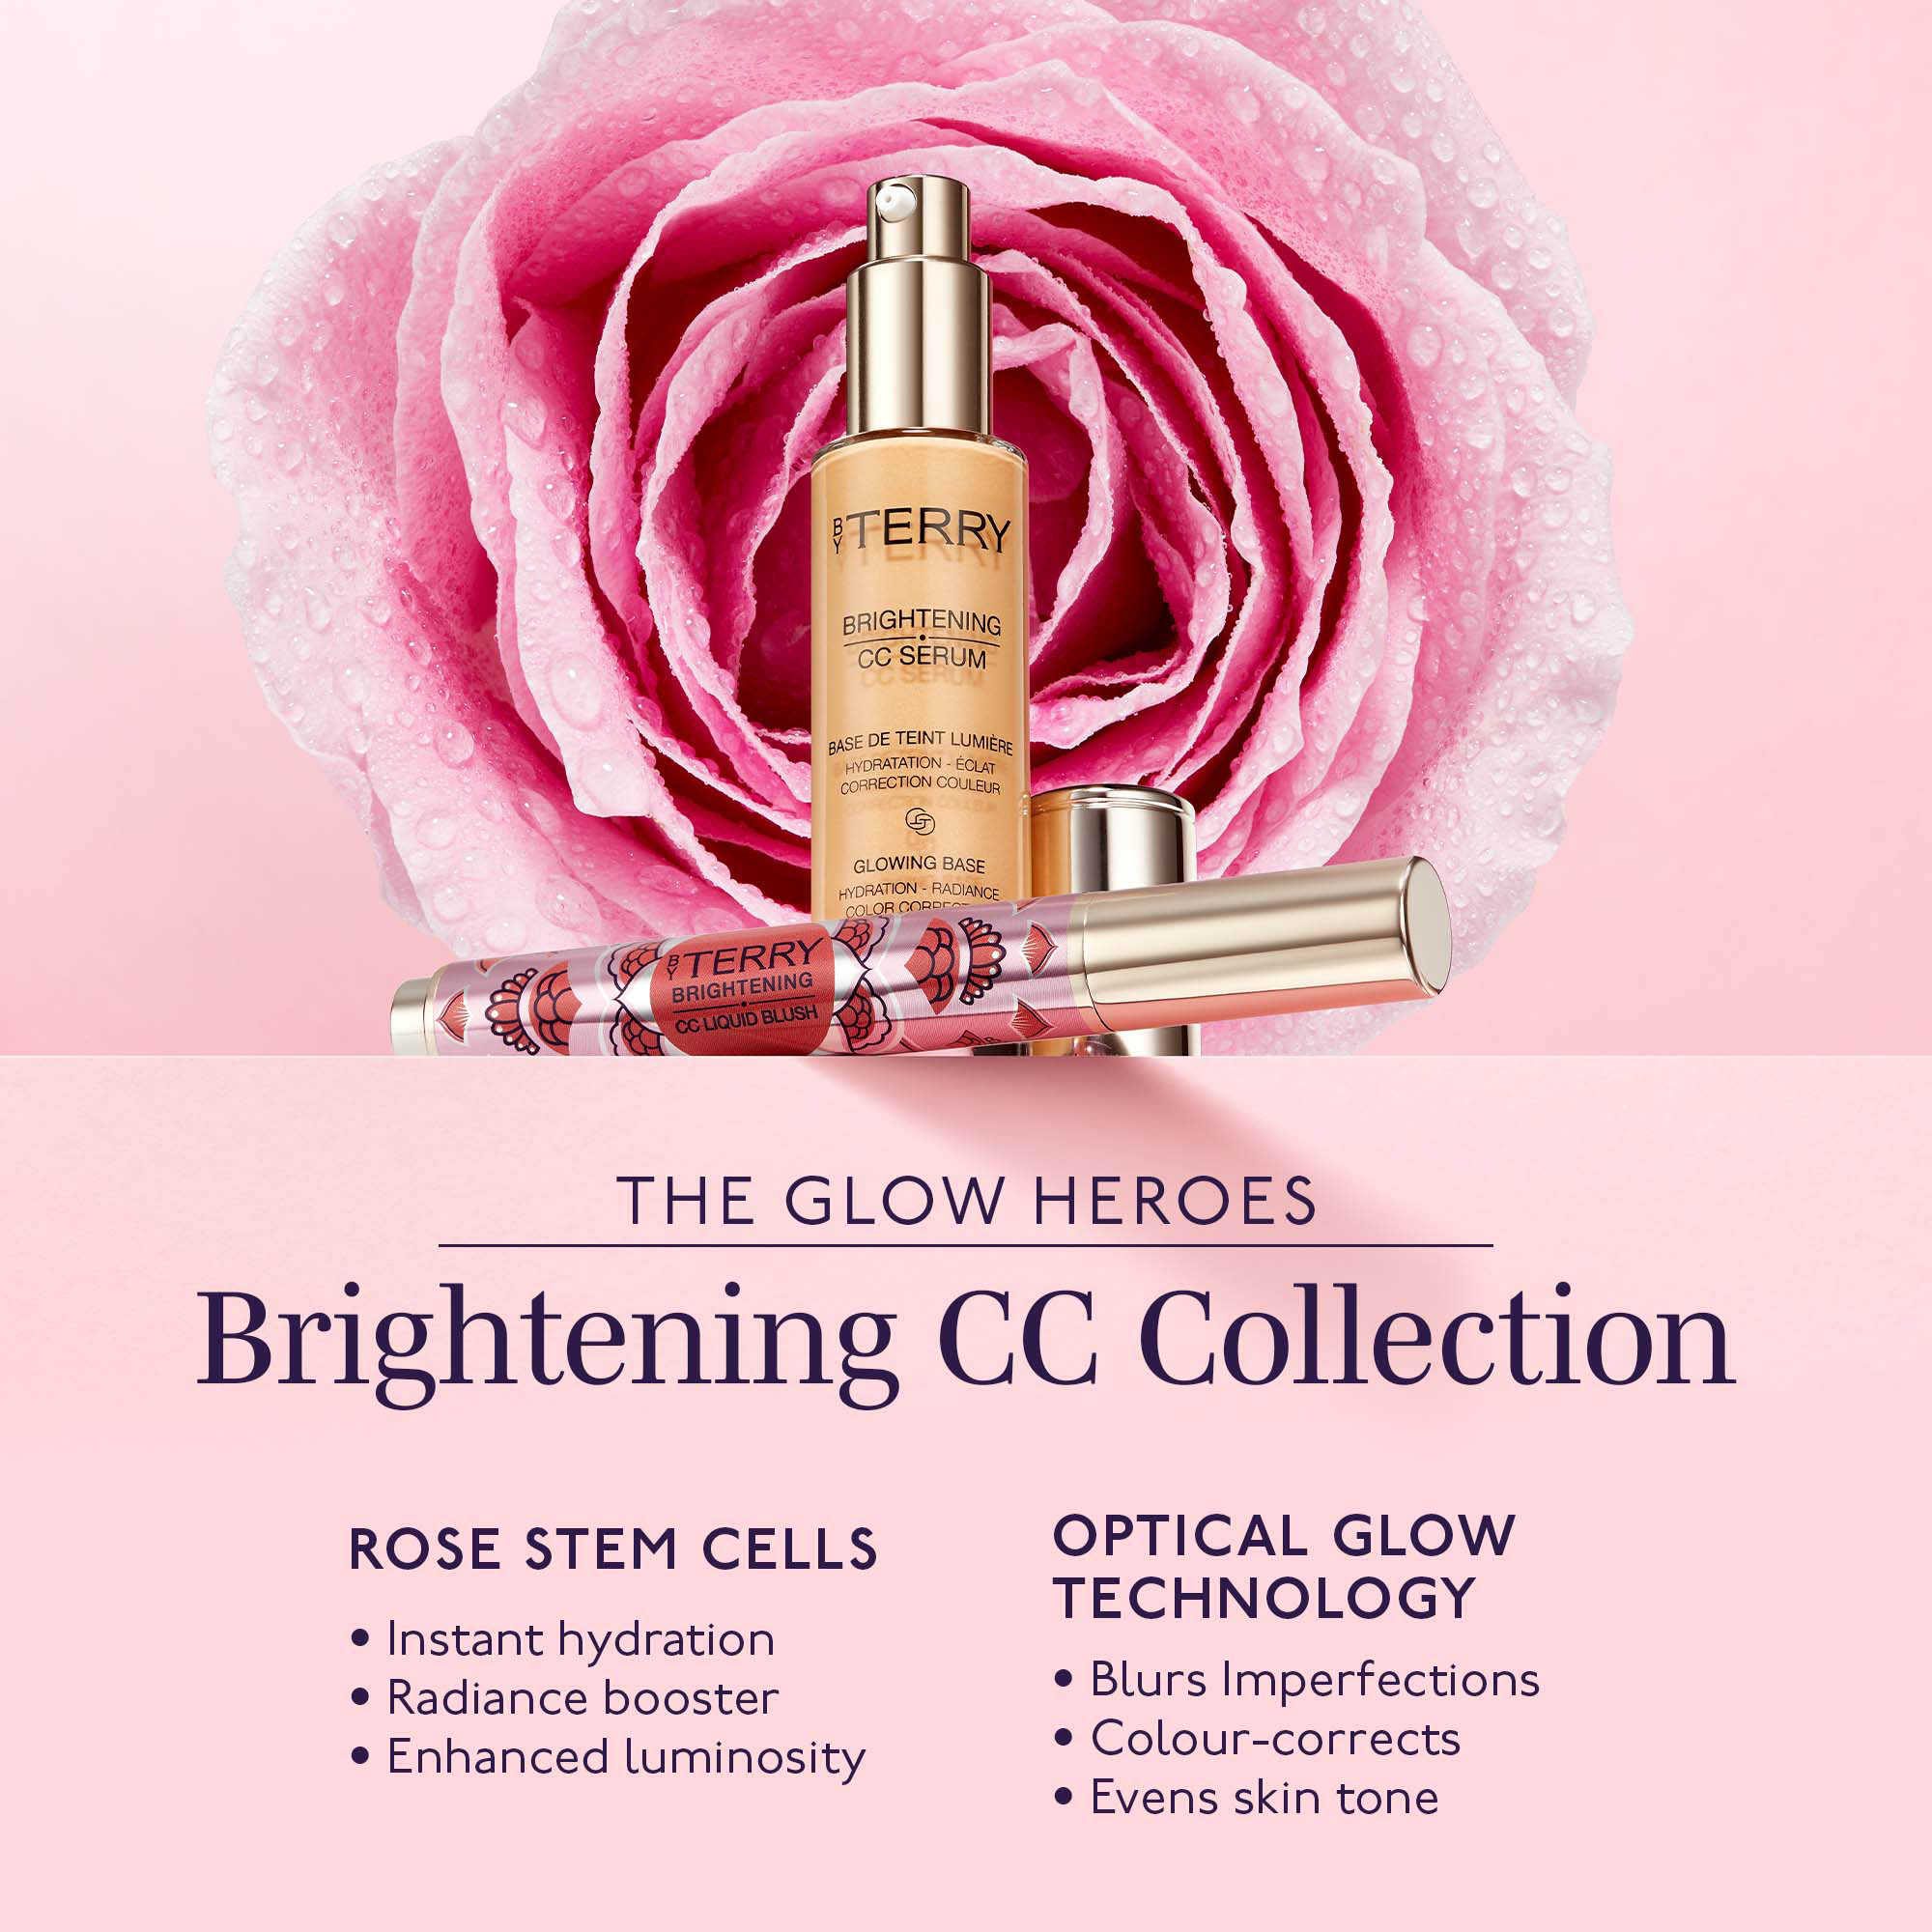 BY TERRY
                          BRIGHTENING CC SERUM
                          ASE DE TEINT LUMIÈRE HYDRATATION - ECLAT CORRECTION COULEUR
                          GLOWING BASE HYDRATION - RADIANCE
                          COLOR CORDES
                          BY TERRY BRIGHTENING CC LIQUID BLUSH
                          THE GLOW HEROES
                          Brightening CC Collection
                          ROSE STEM CELLS
                          • Instant hydration • Radiance booster Enhanced luminosity
                          OPTICAL GLOW TECHNOLOGY • Blurs Imperfections • Colour-corrects • Evens skin tone